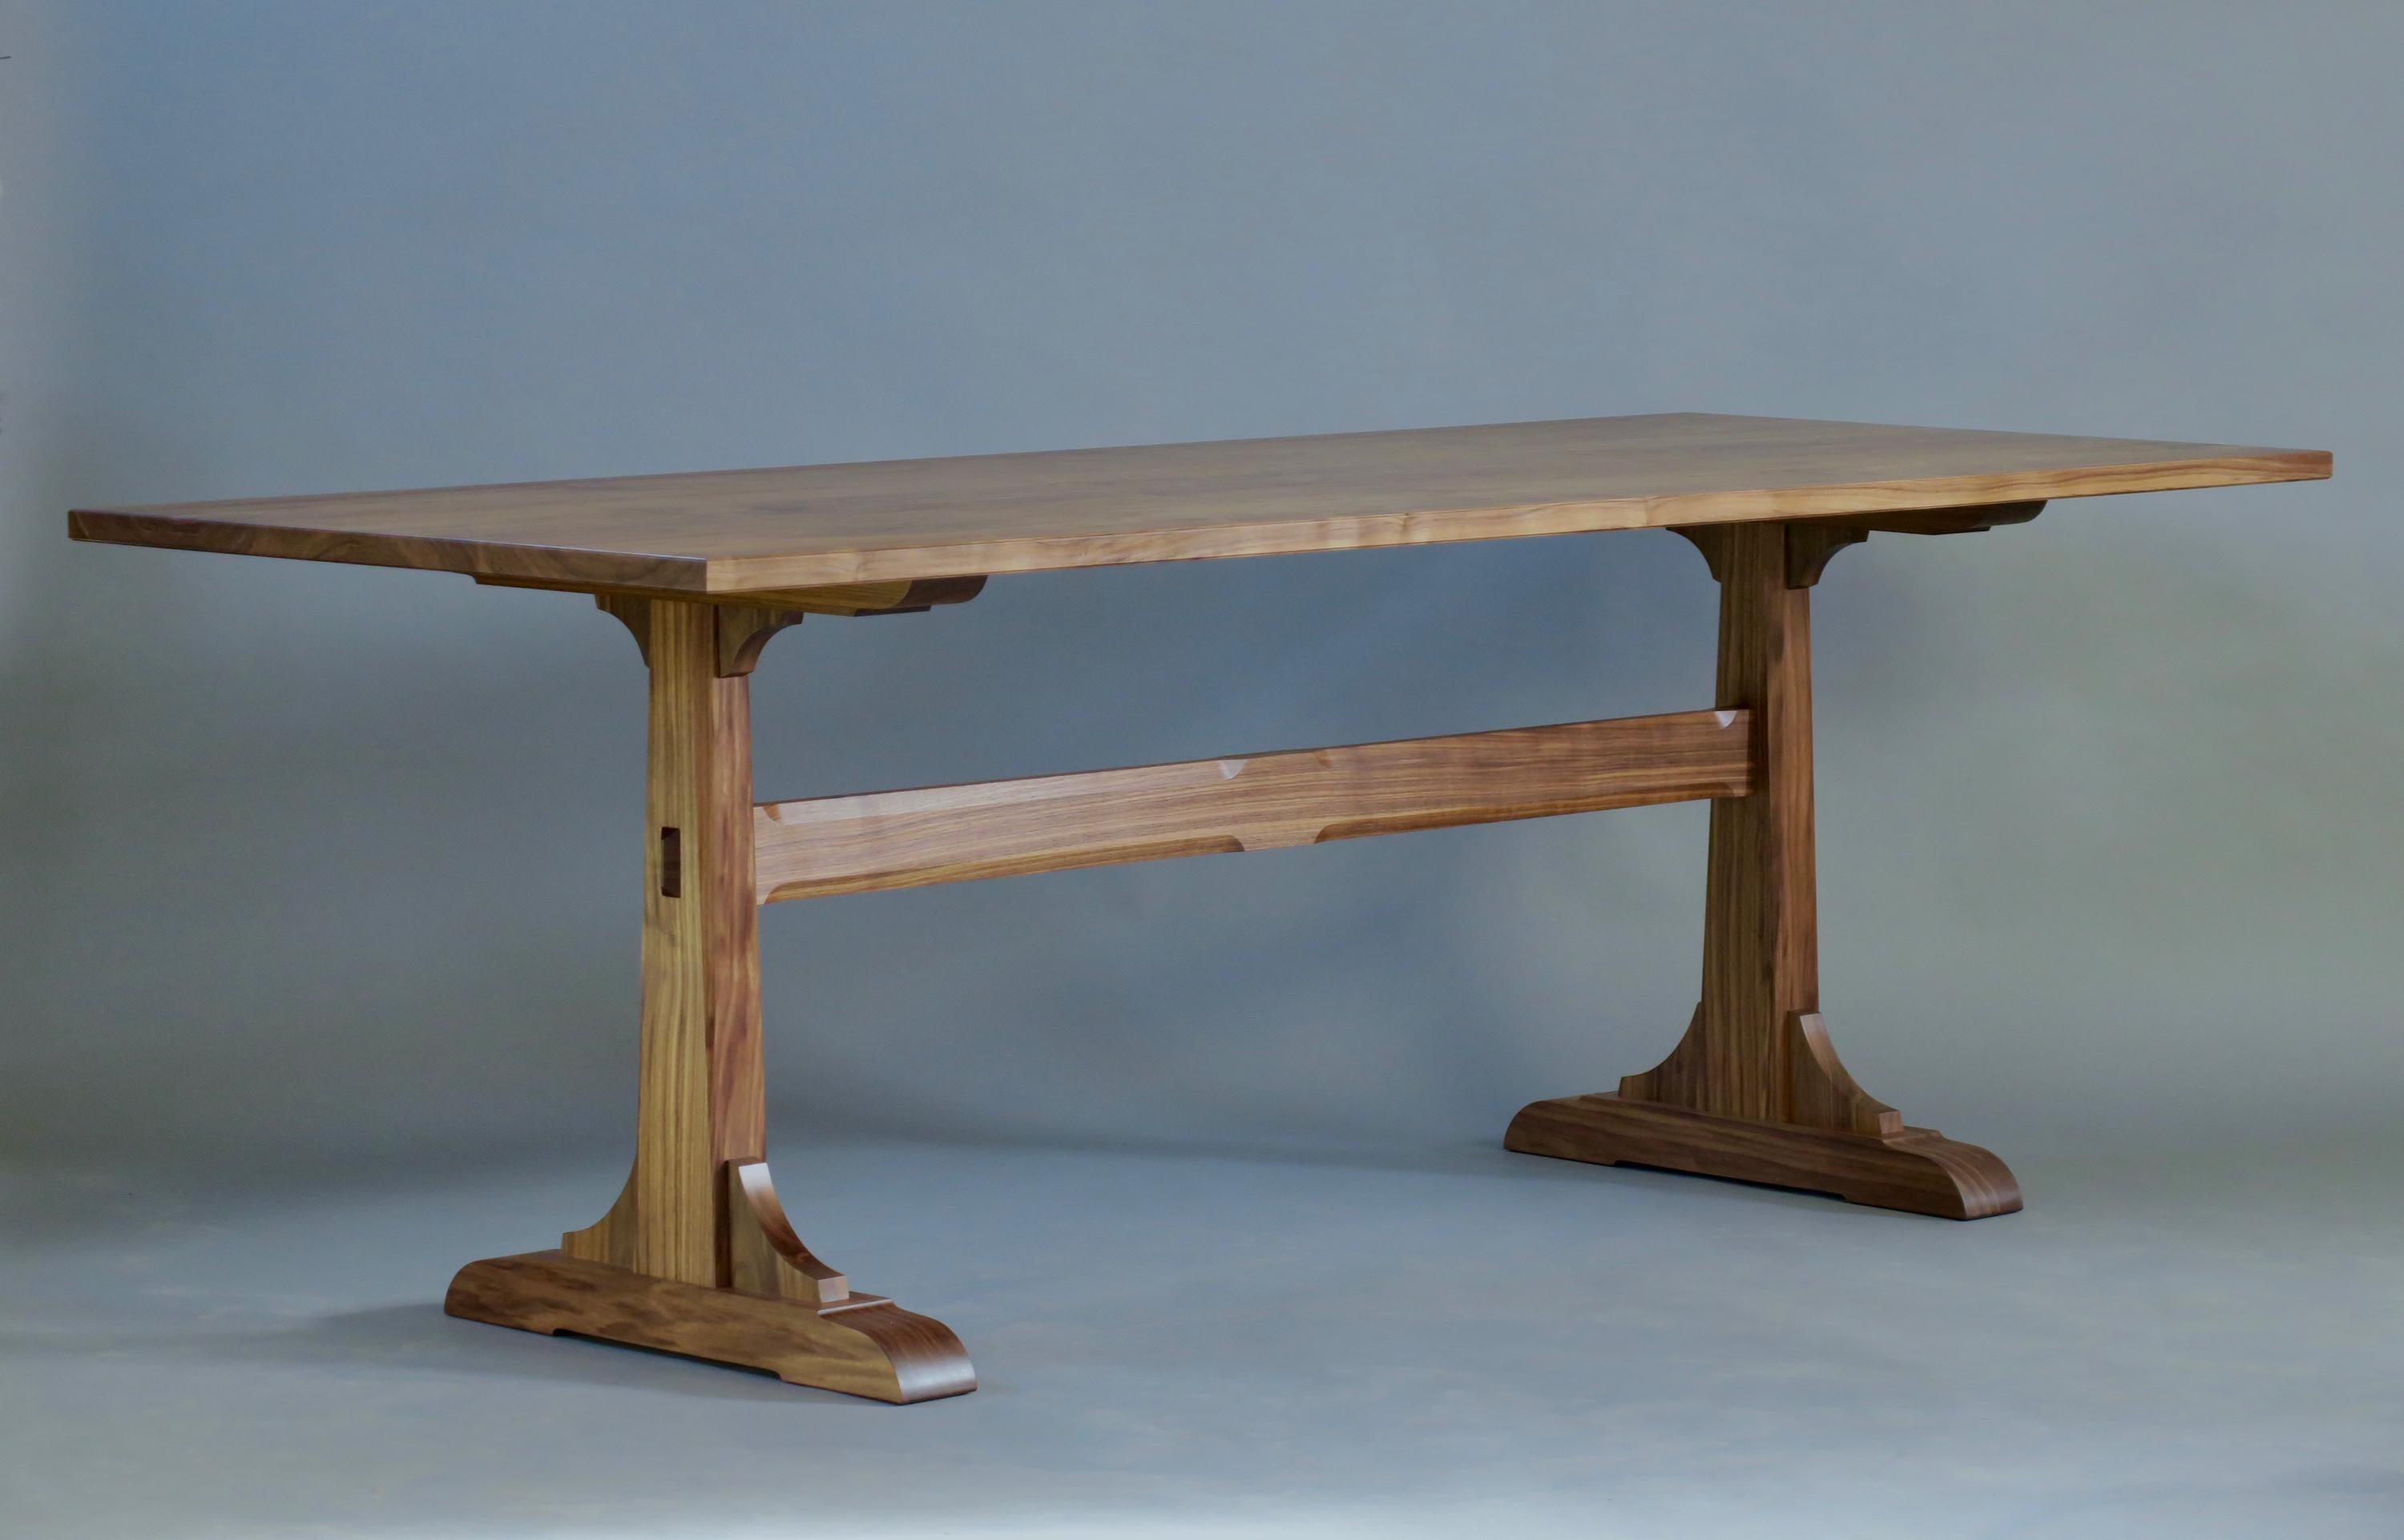 The Granero dining table is made from Pennsylvania walnut and features a contemporary trestle structure. It measures 34